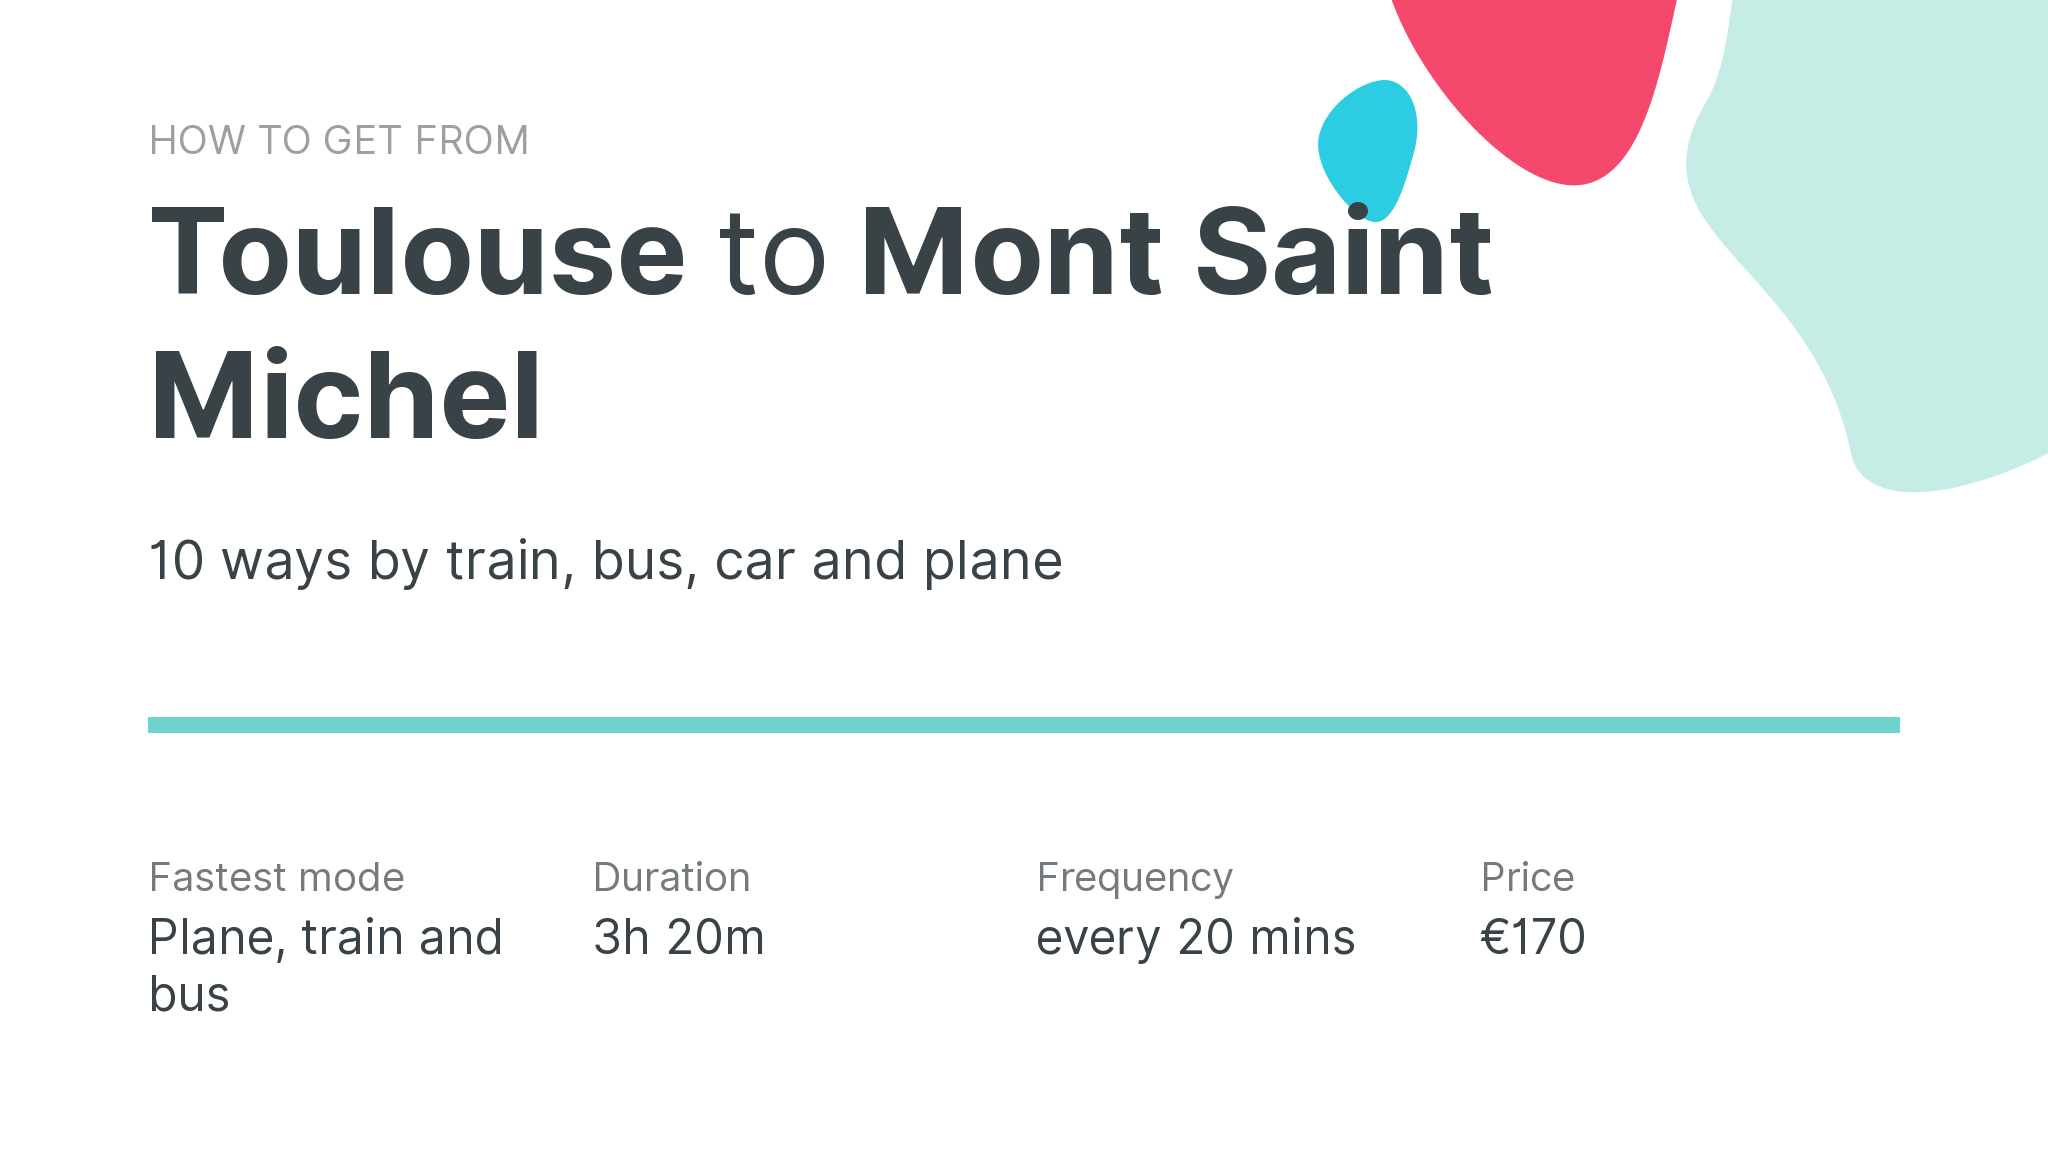 How do I get from Toulouse to Mont Saint Michel